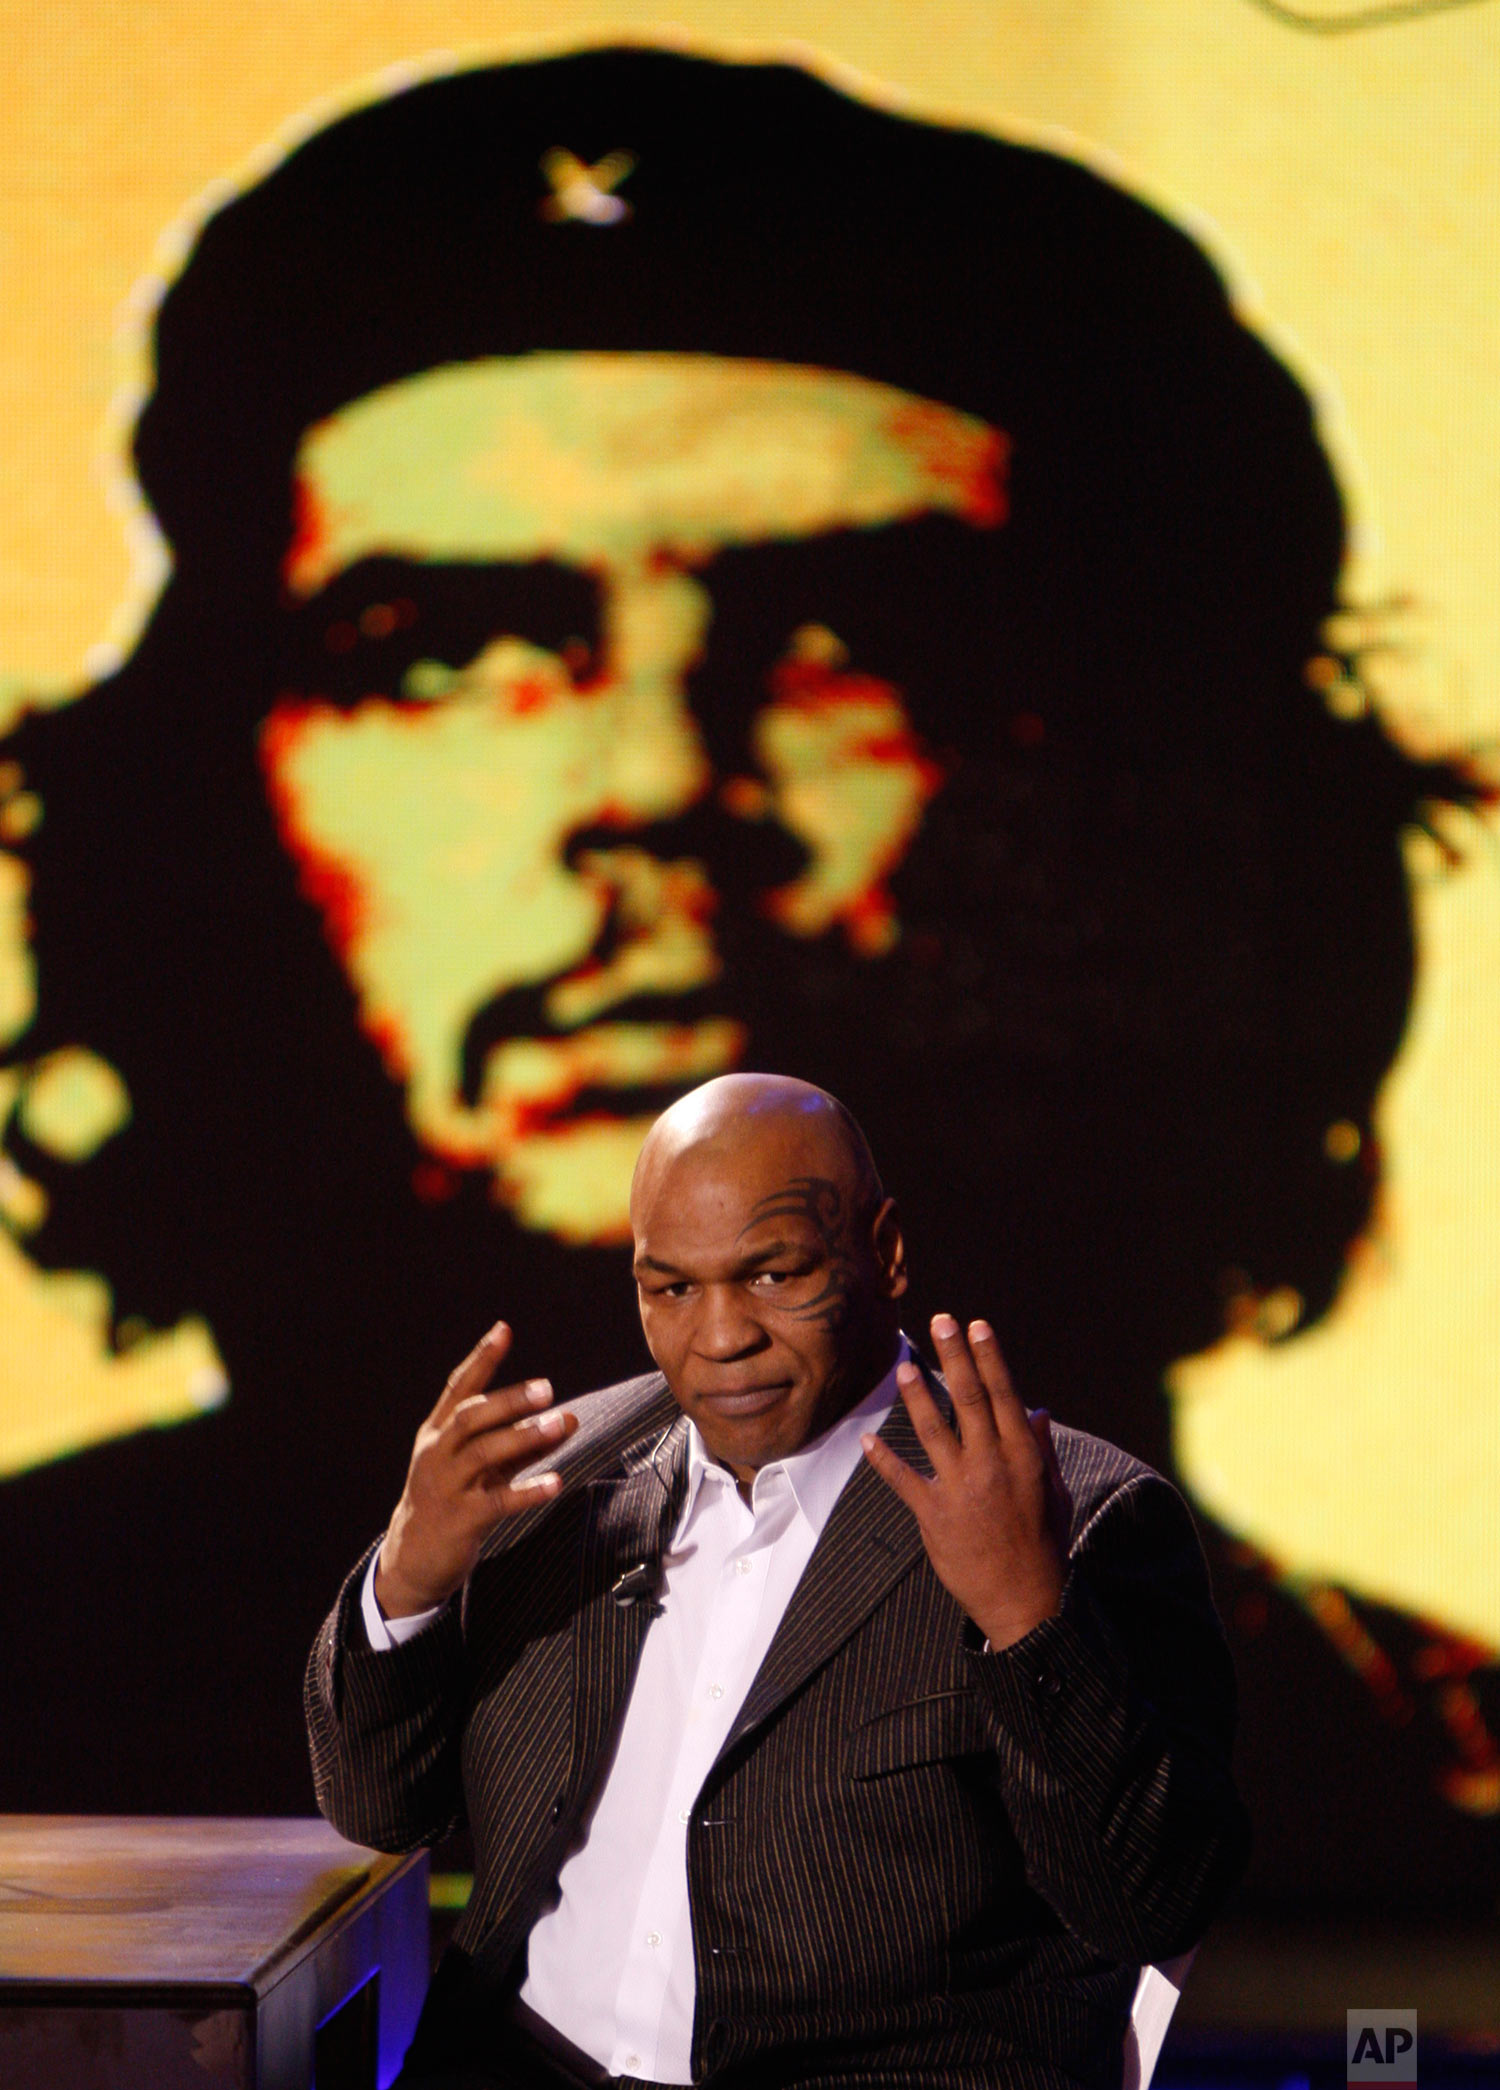  Former heavyweight boxing champion Mike Tyson reacts as a picture of Che Guevara is projected on a giant screen, during the taping of the "Chiambretti Night" television show in Milan, Italy, Monday, Jan. 25, 2010. (AP Photo/Luca Bruno) 